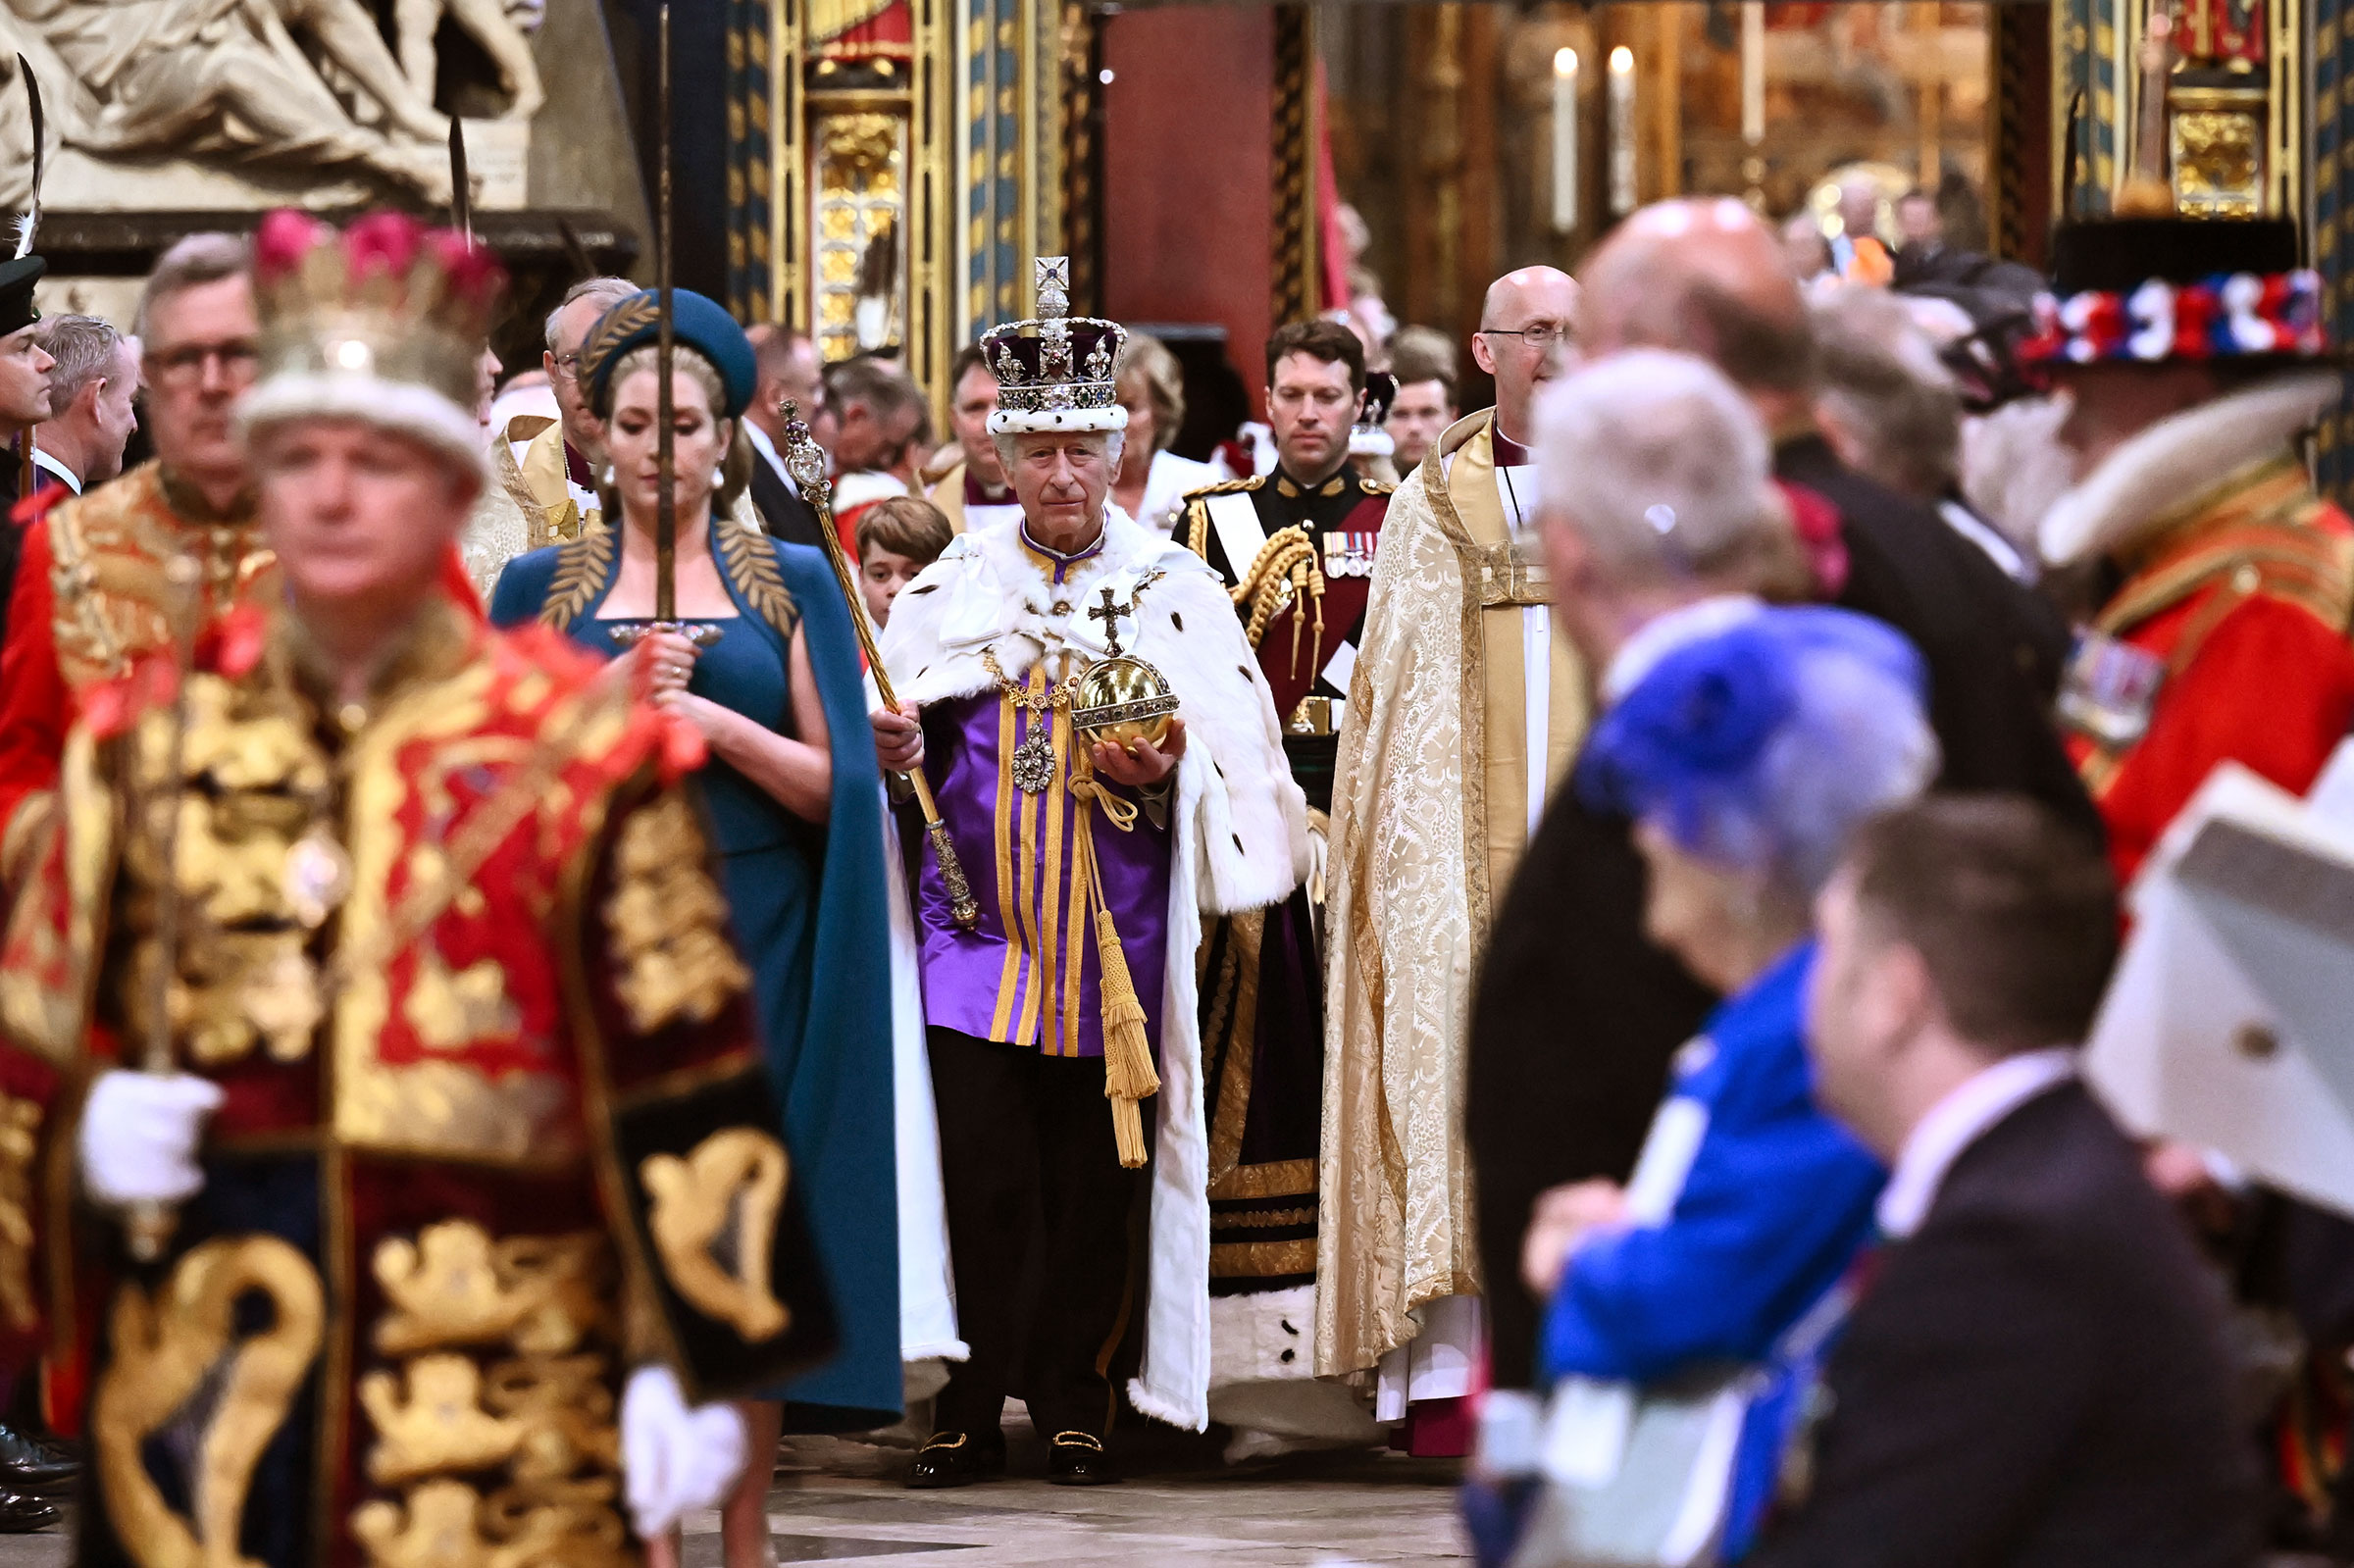 King Charles III wearing the Imperial state Crown carrying the Sovereign's Orb and Sceptre leaves Westminster Abbey after the Coronation ceremony. (2023 Getty Images)